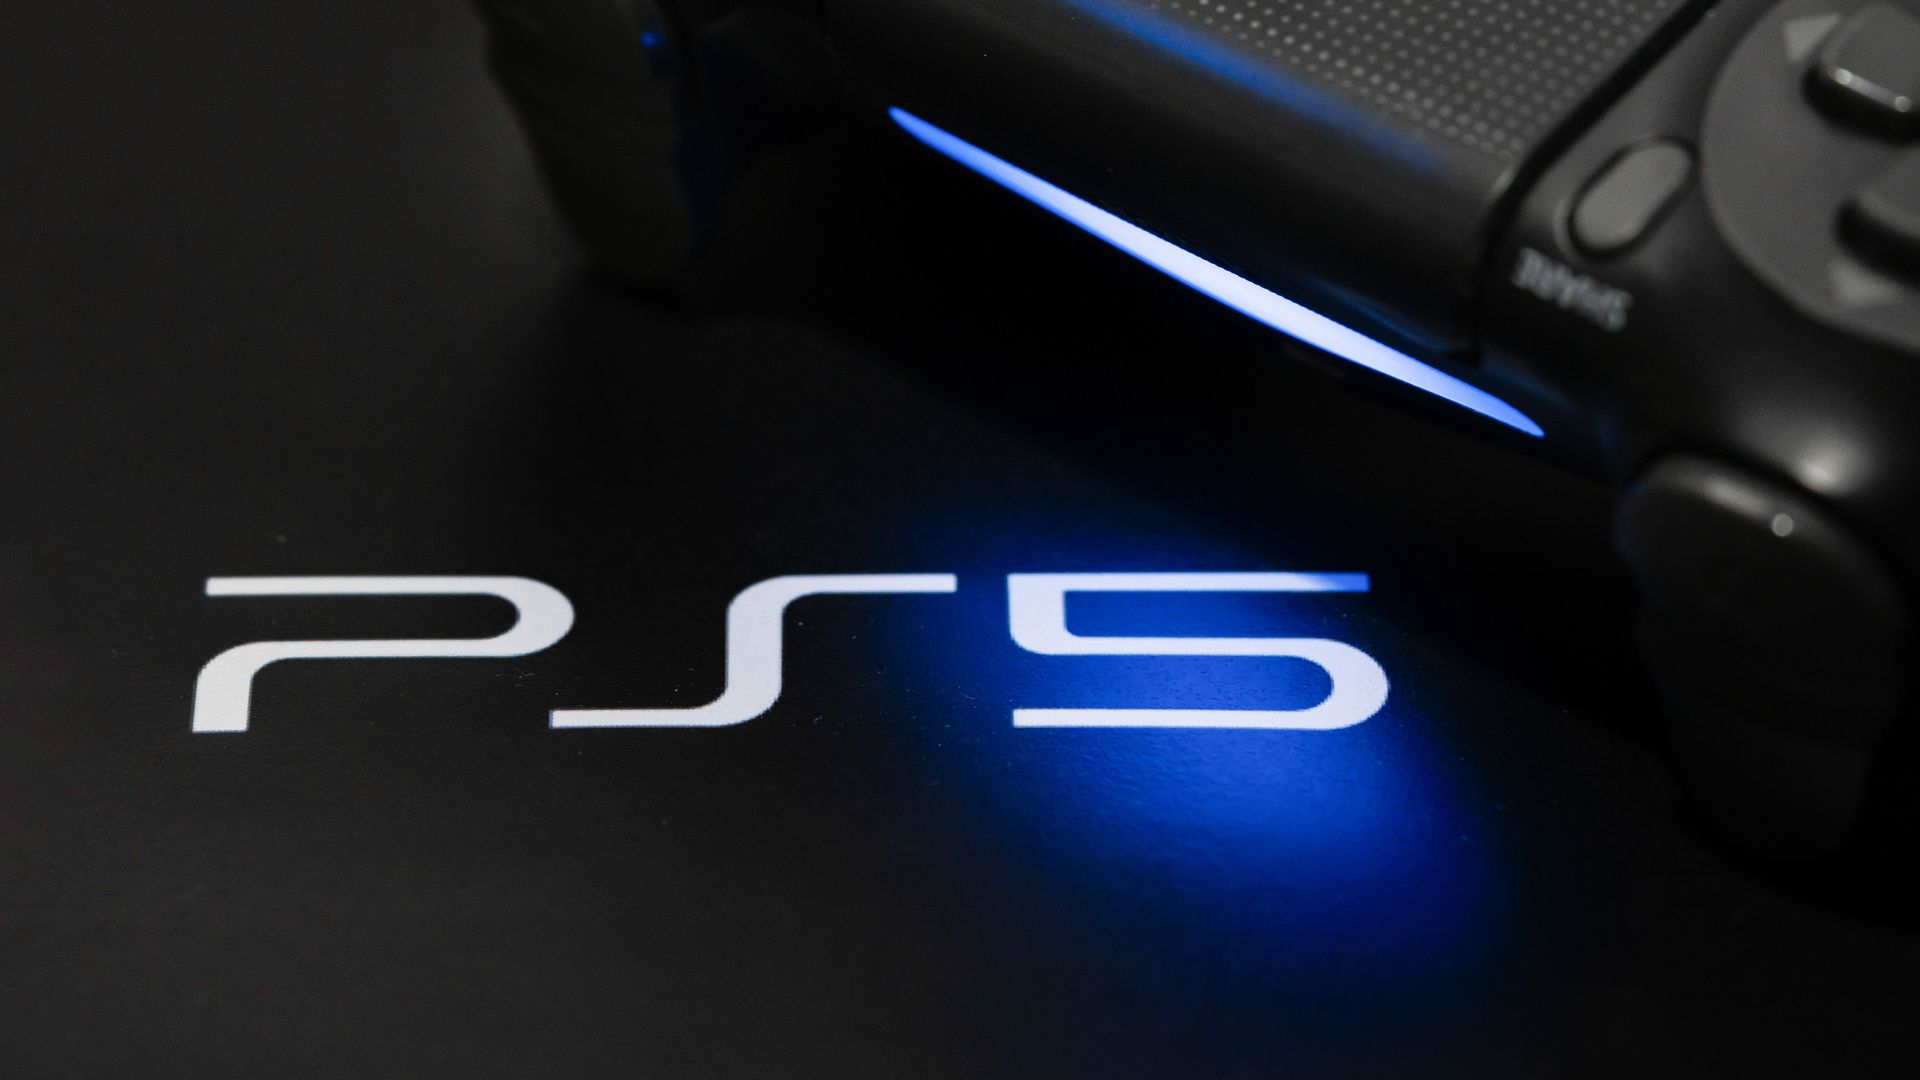 PS5 price may be driven up by scarce parts, says report on Sony